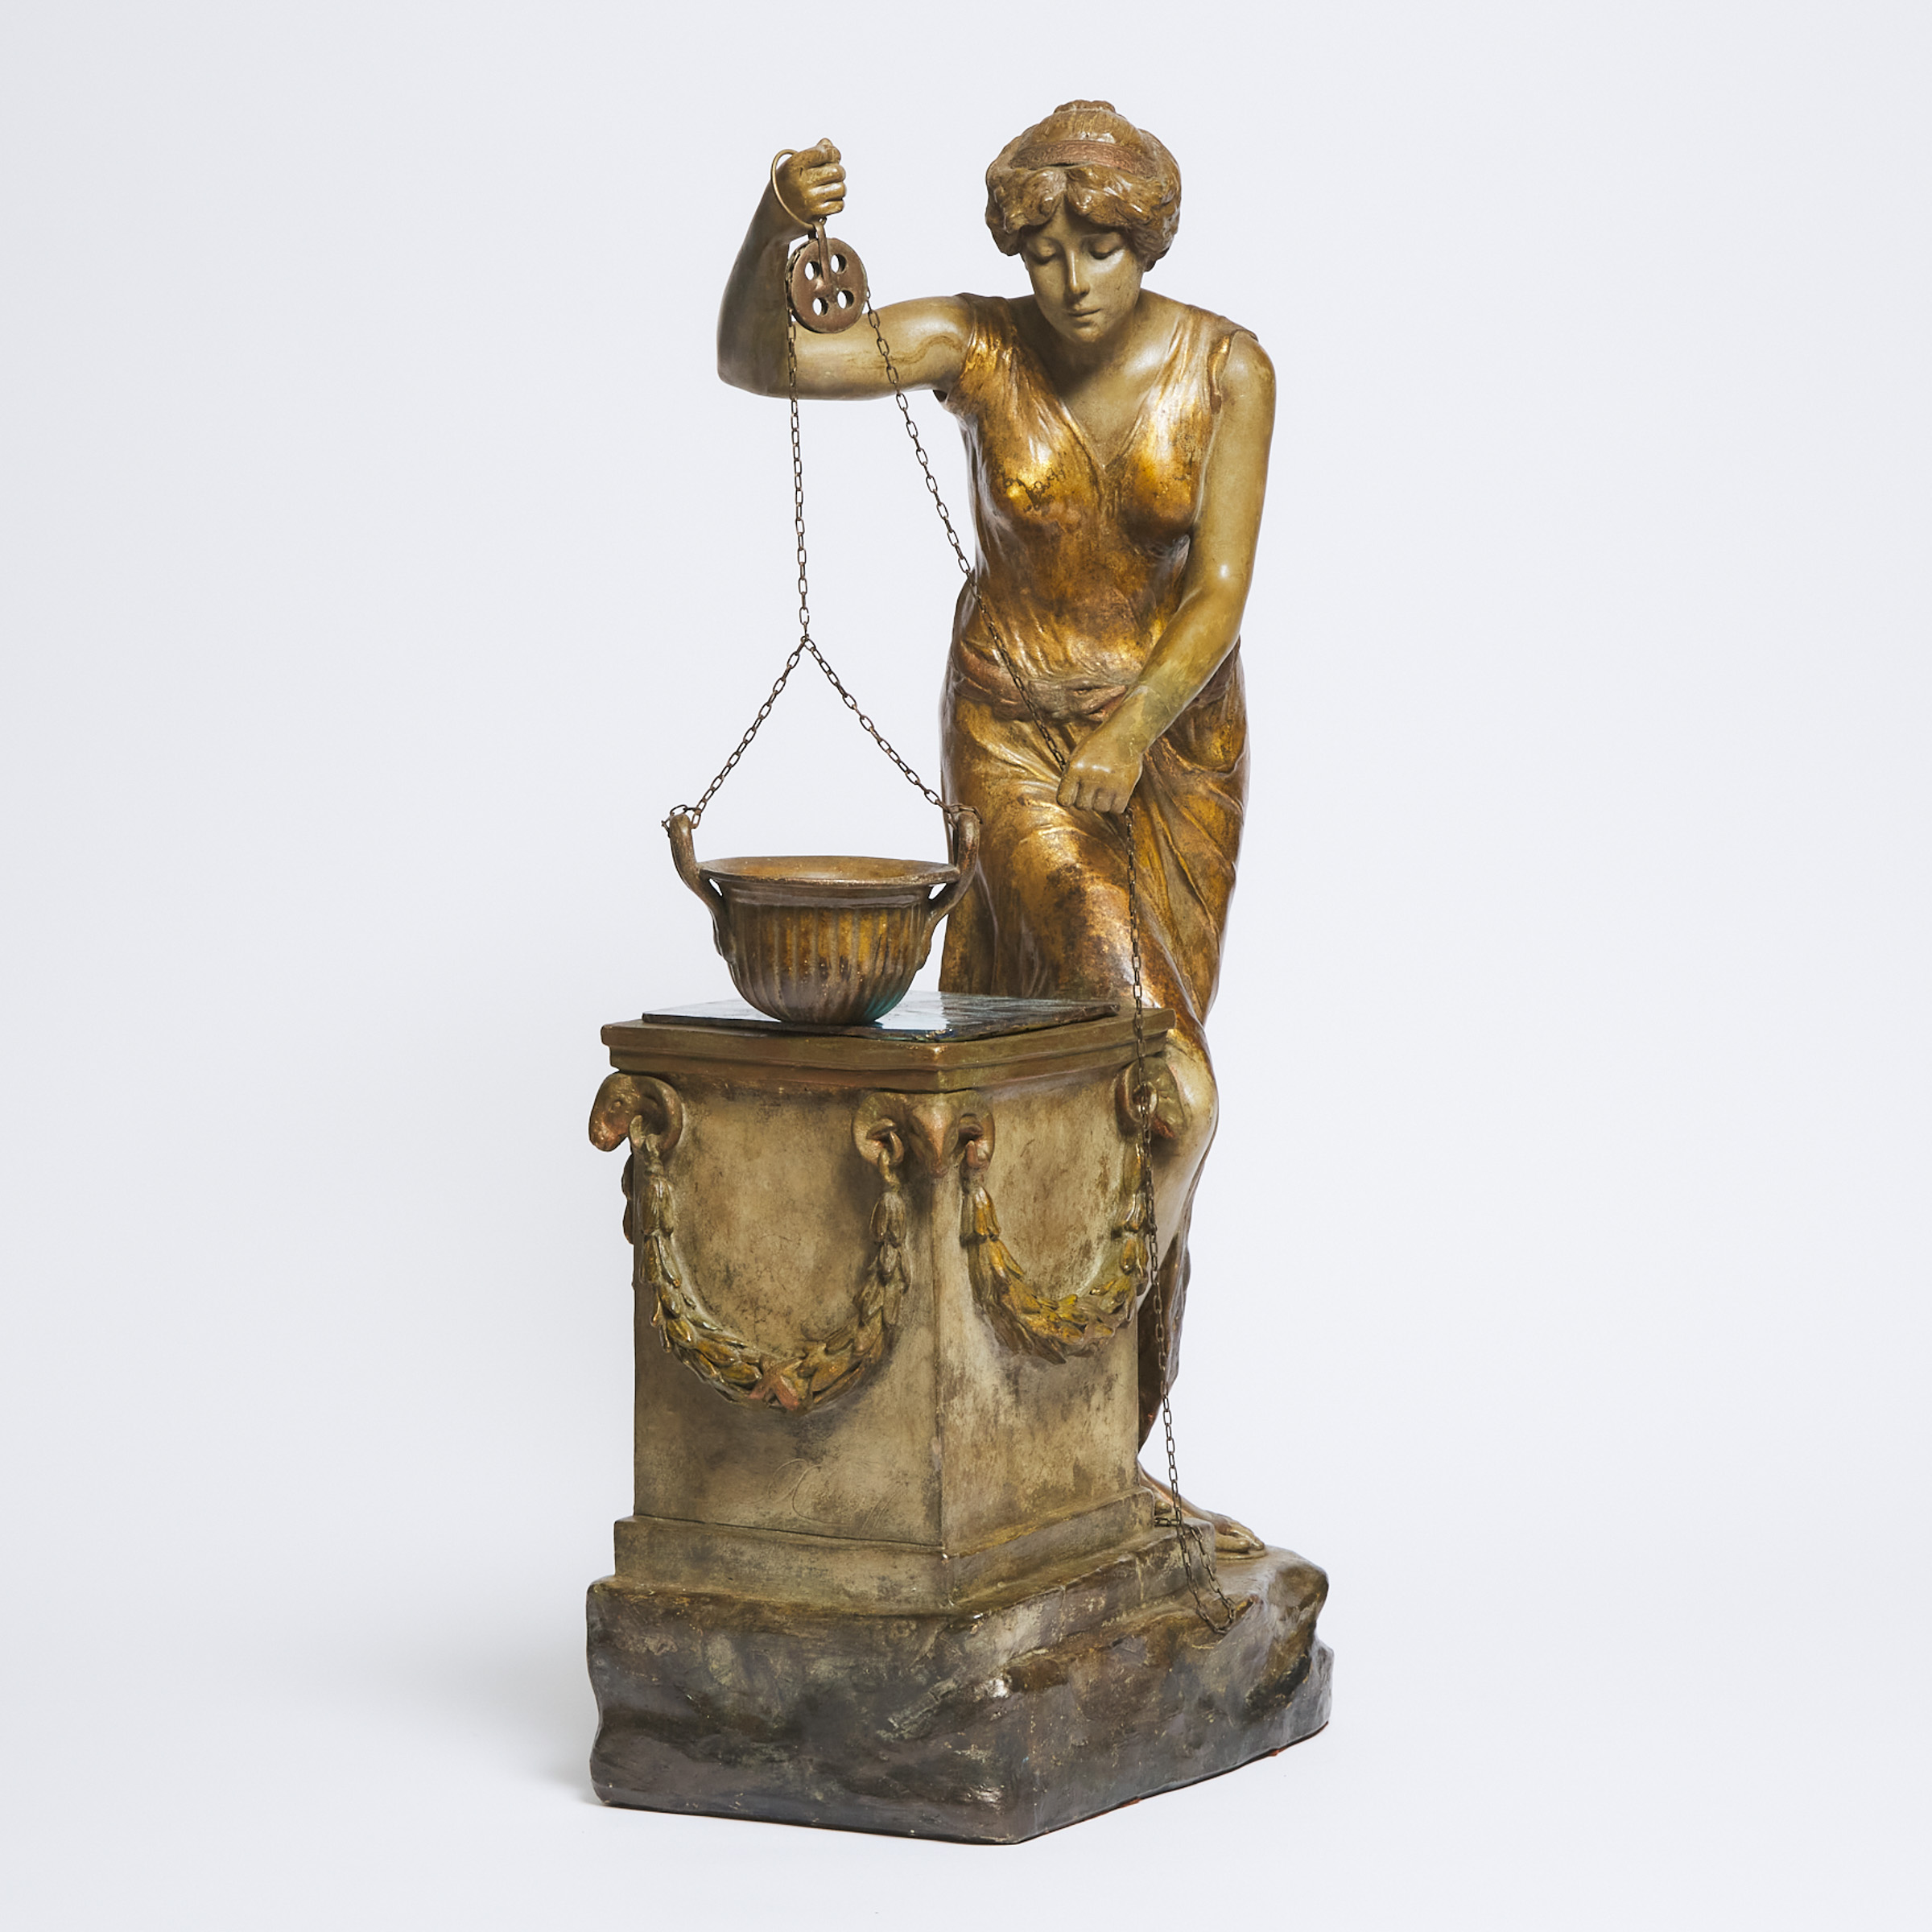 Large Austrian Patinated Terracotta Illuminated Model of a Young Woman Drawing Water from a Neoclassical Well, Goldschieder, Vienna, early 20th century